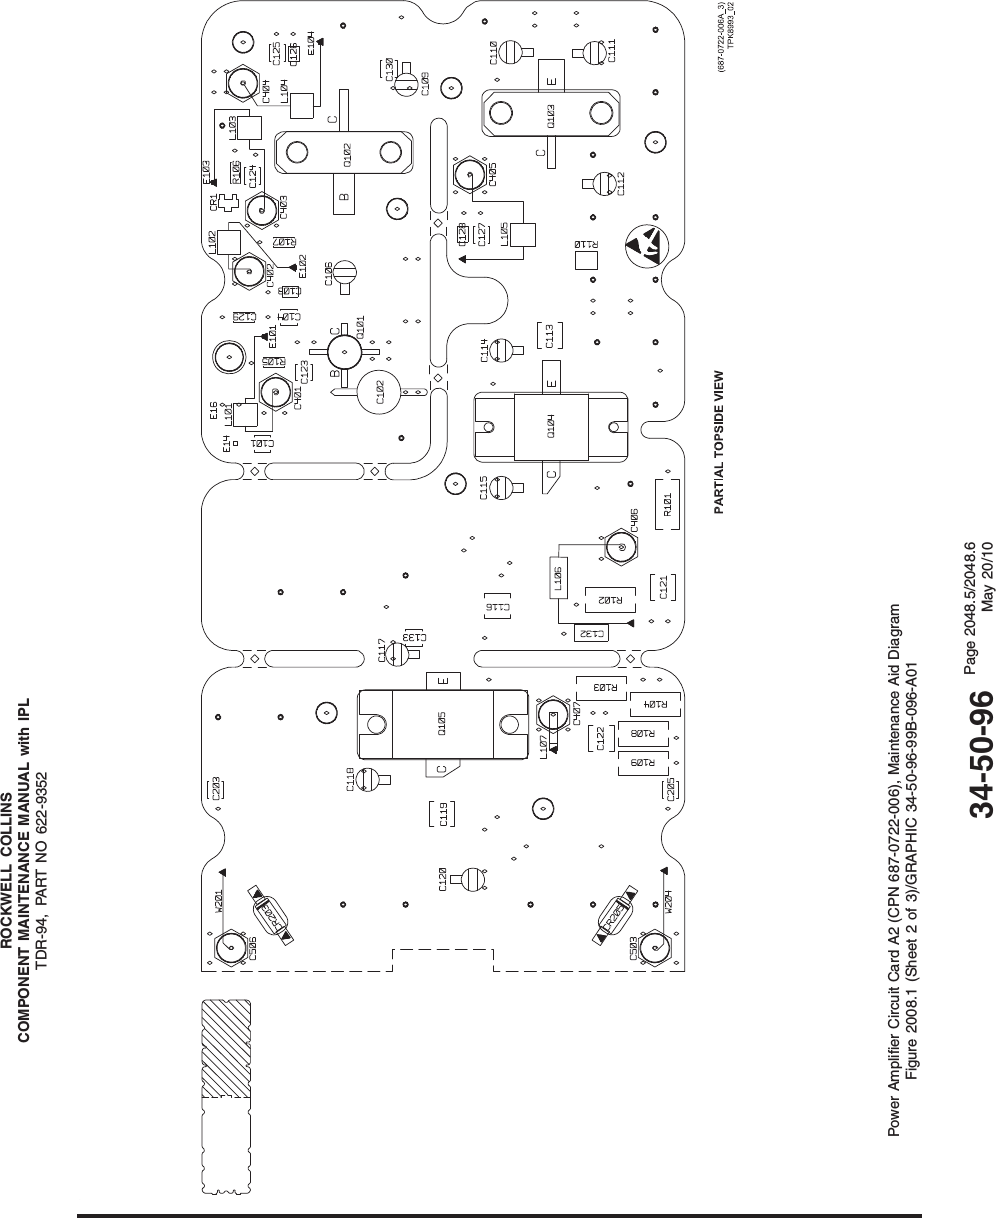 ROCKWELL COLLINSCOMPONENT MAINTENANCE MANUAL with IPLTDR-94, PART NO 622-9352Power Amplifier Circuit Card A2 (CPN 687-0722-006), Maintenance Aid DiagramFigure 2008.1 (Sheet 2 of 3)/GRAPHIC 34-50-96-99B-096-A0134-50-96 Page 2048.5/2048.6May 20/10